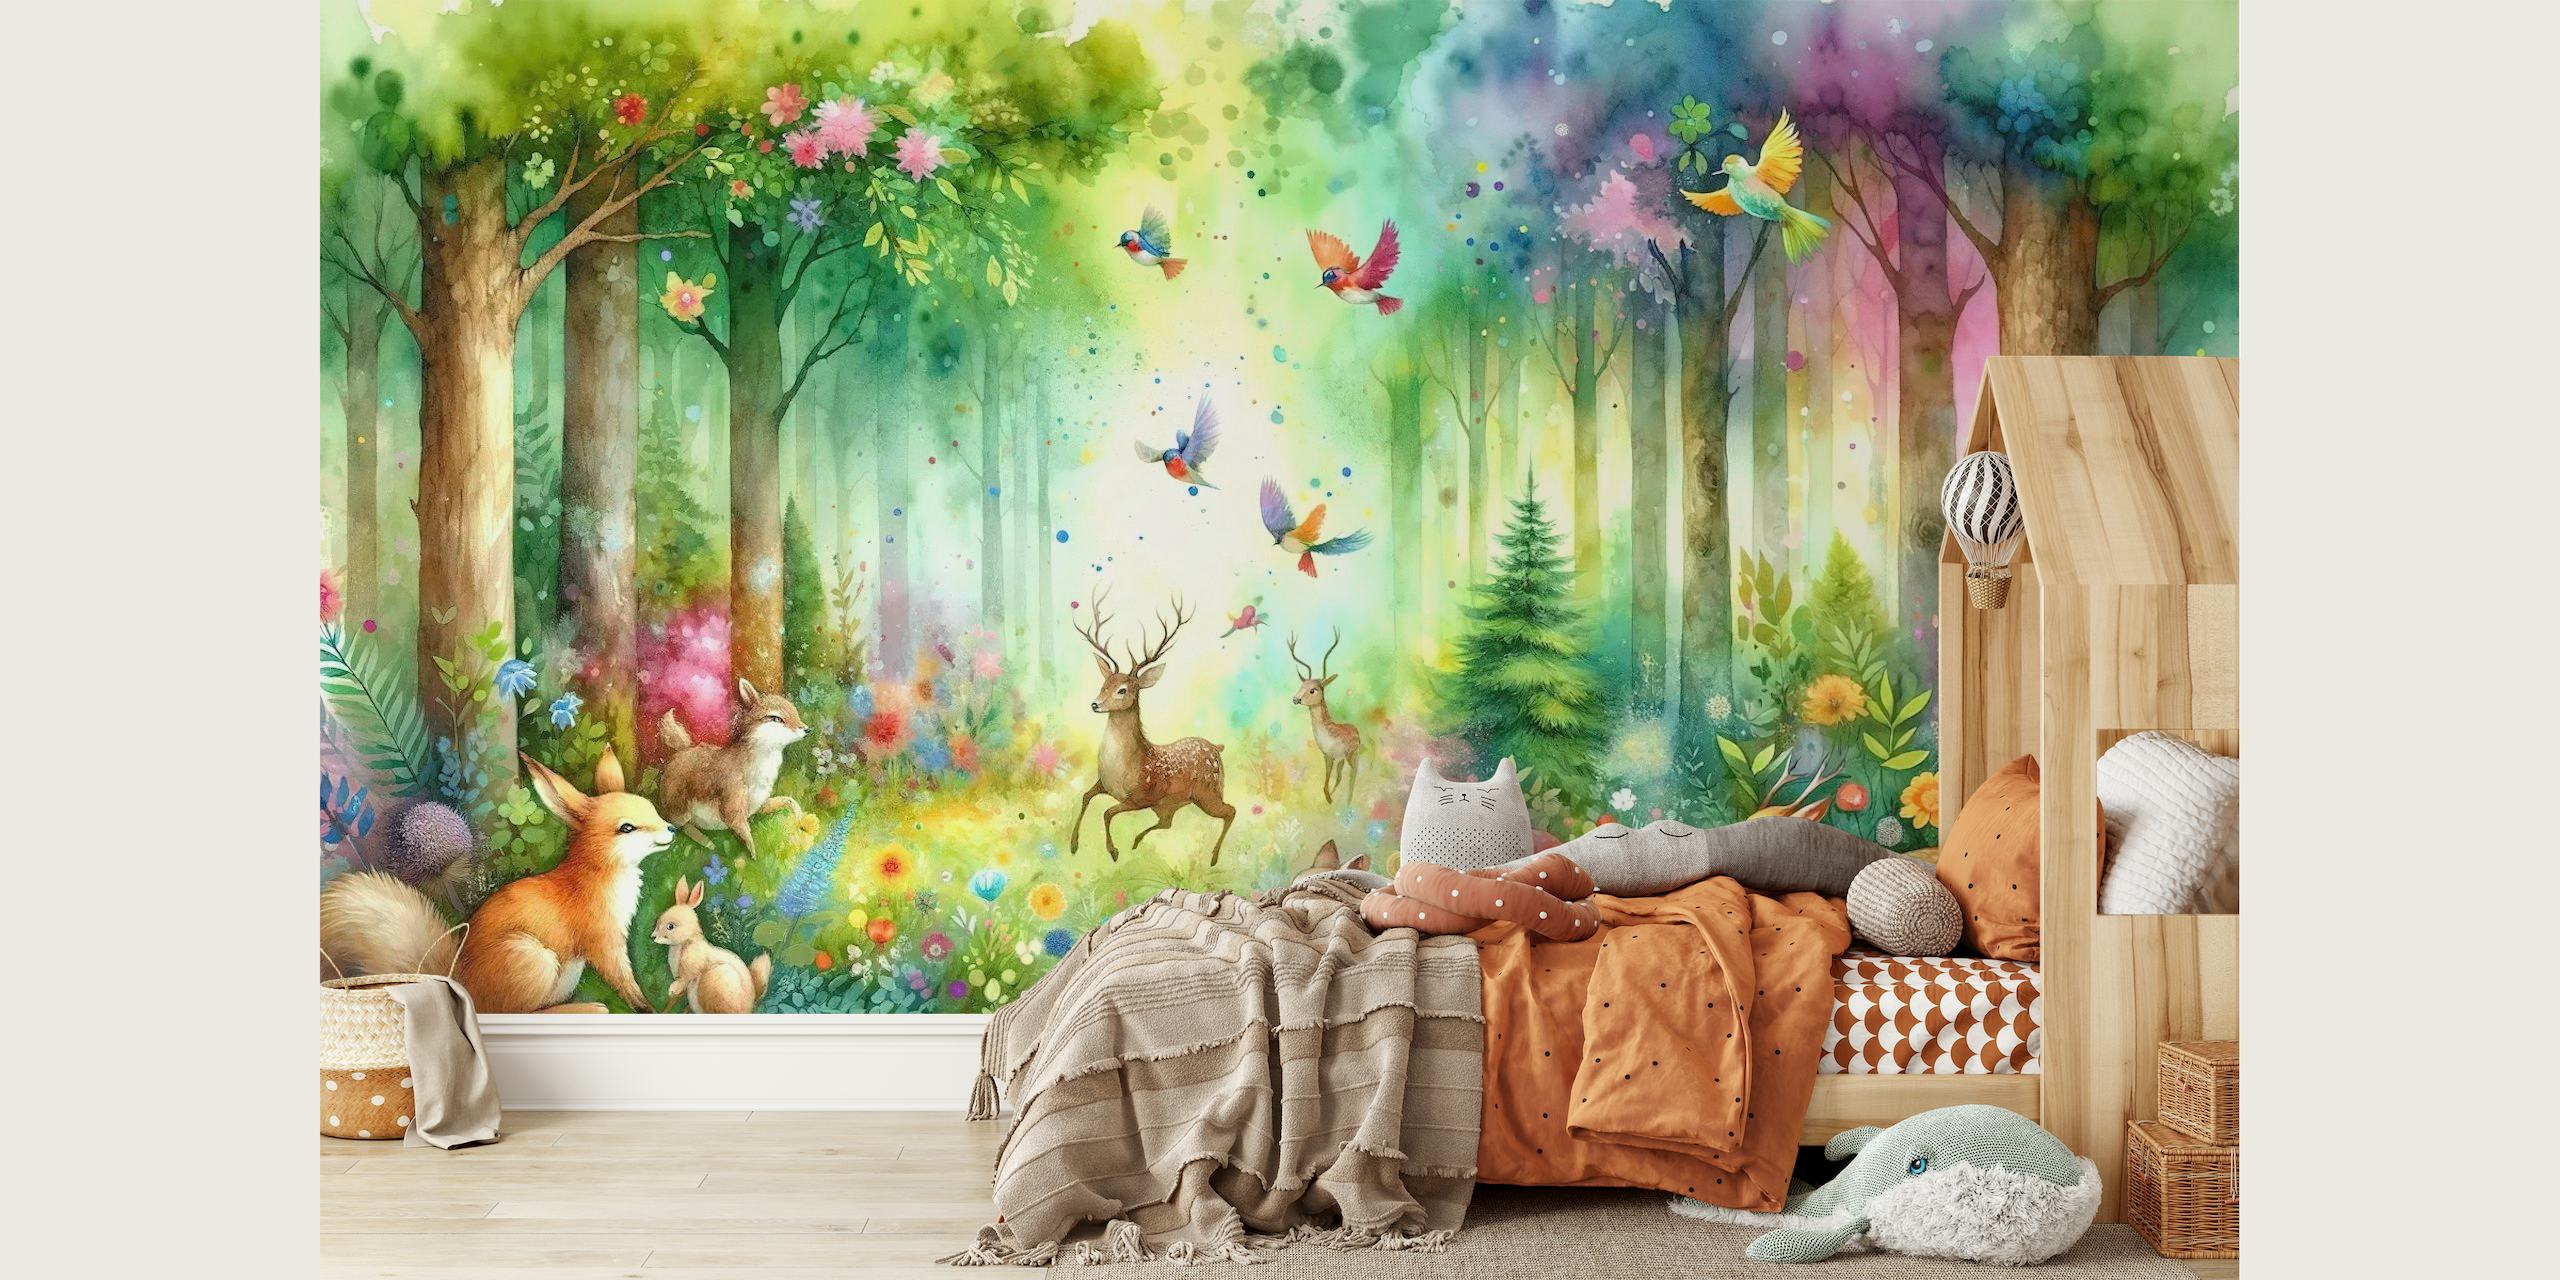 The Magical Forest wallpaper